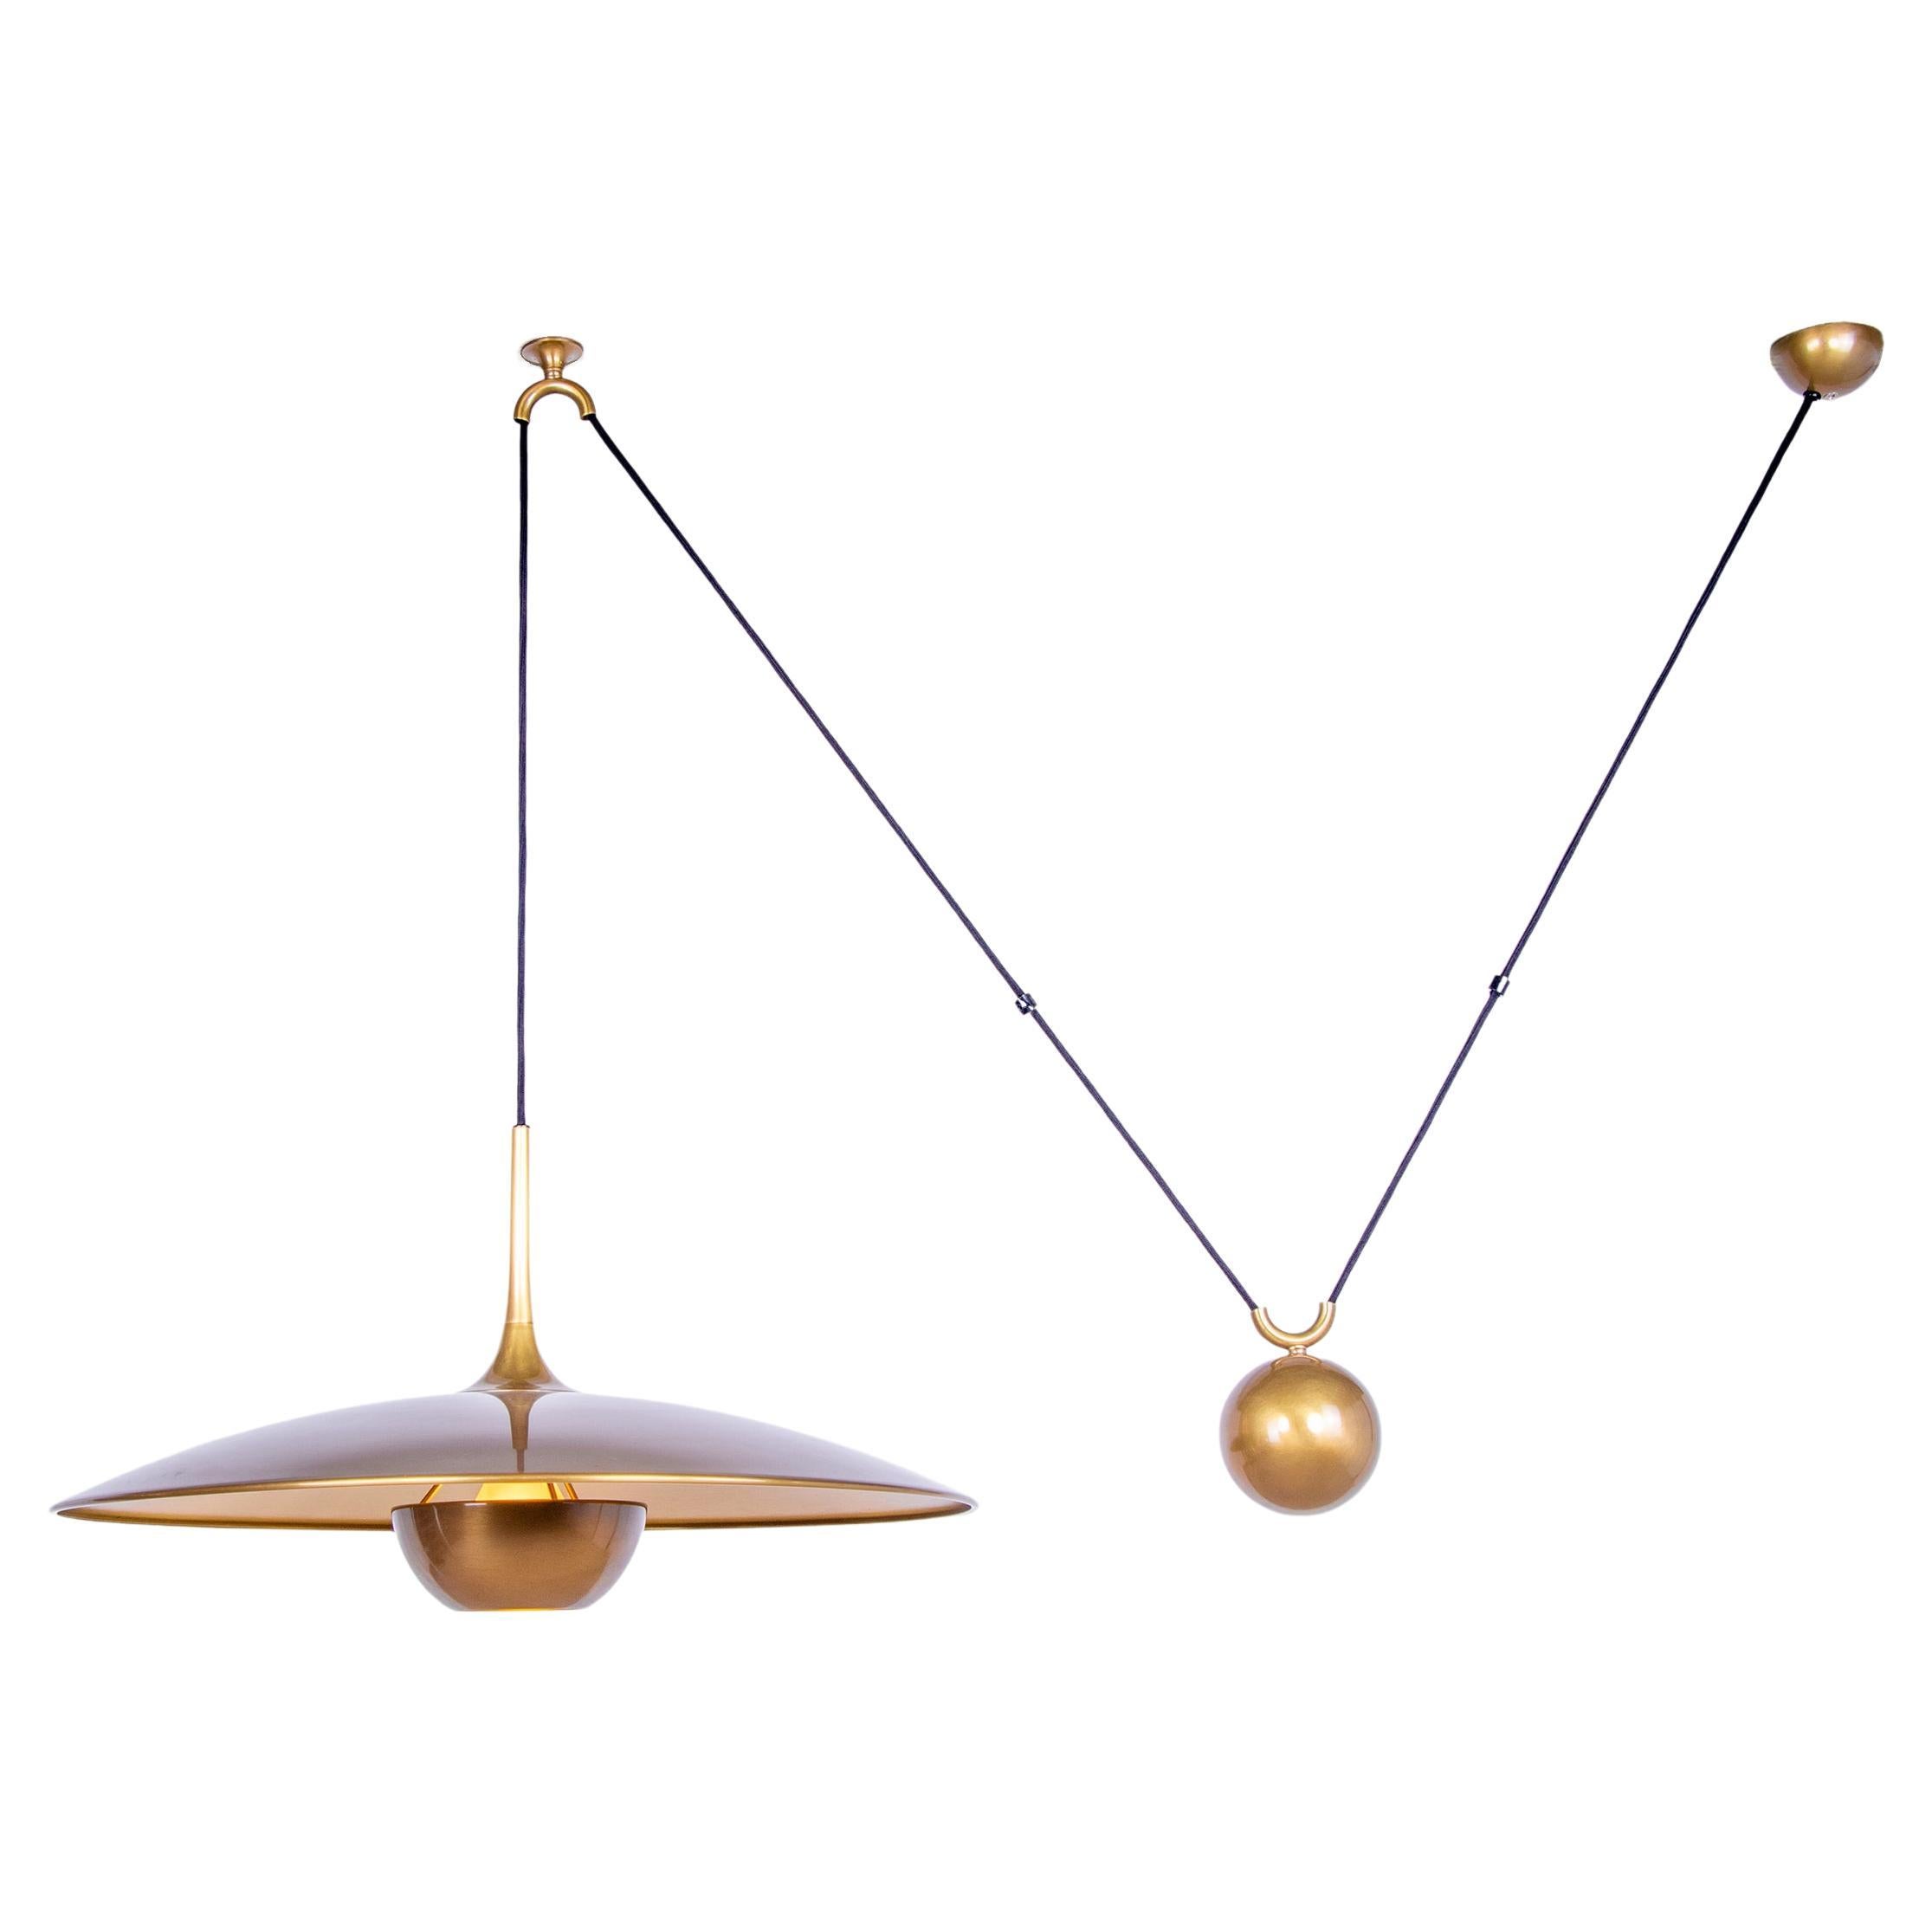 Adjustable Brass Pendant Lamp Onos 55 by Florian Schulz, Germany, 1970s